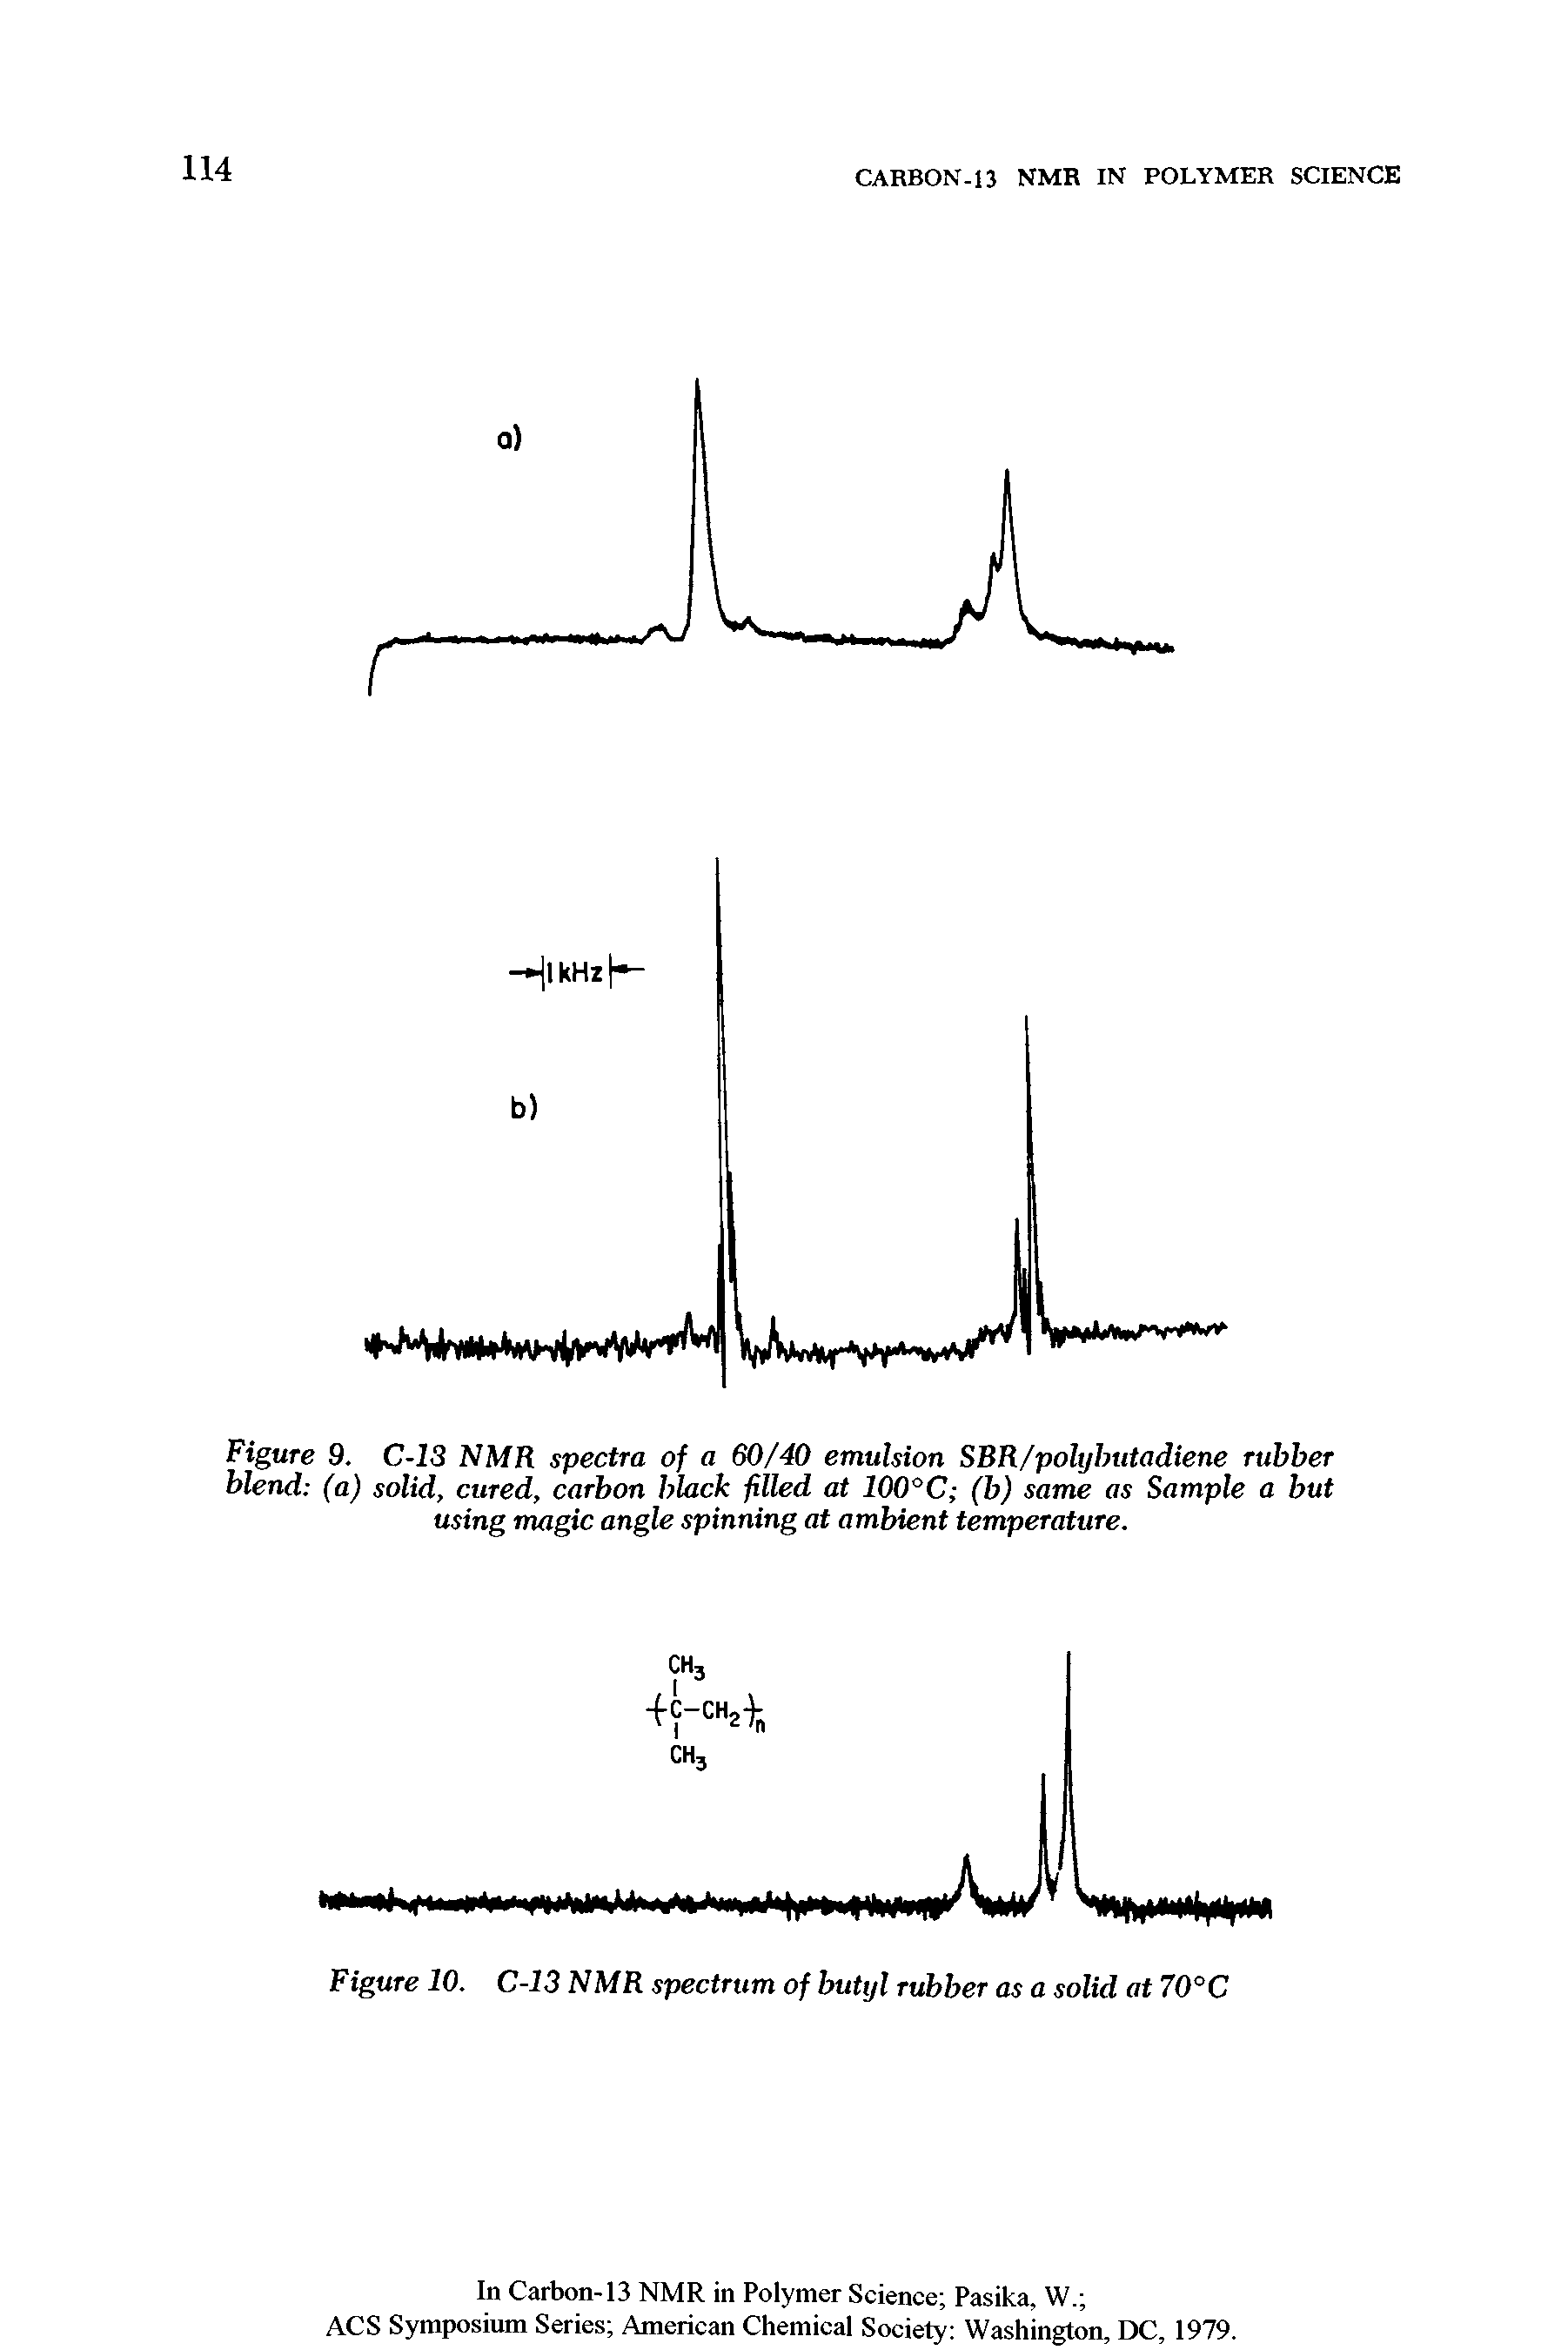 Figure 9. C-13 NMR spectra of a 60/40 emulsion SBR/polijbutadiene rubber blend (a) solid, cured, carbon black filled at 100°C (b) same as Sample a but using magic angle spinning at ambient temperature.